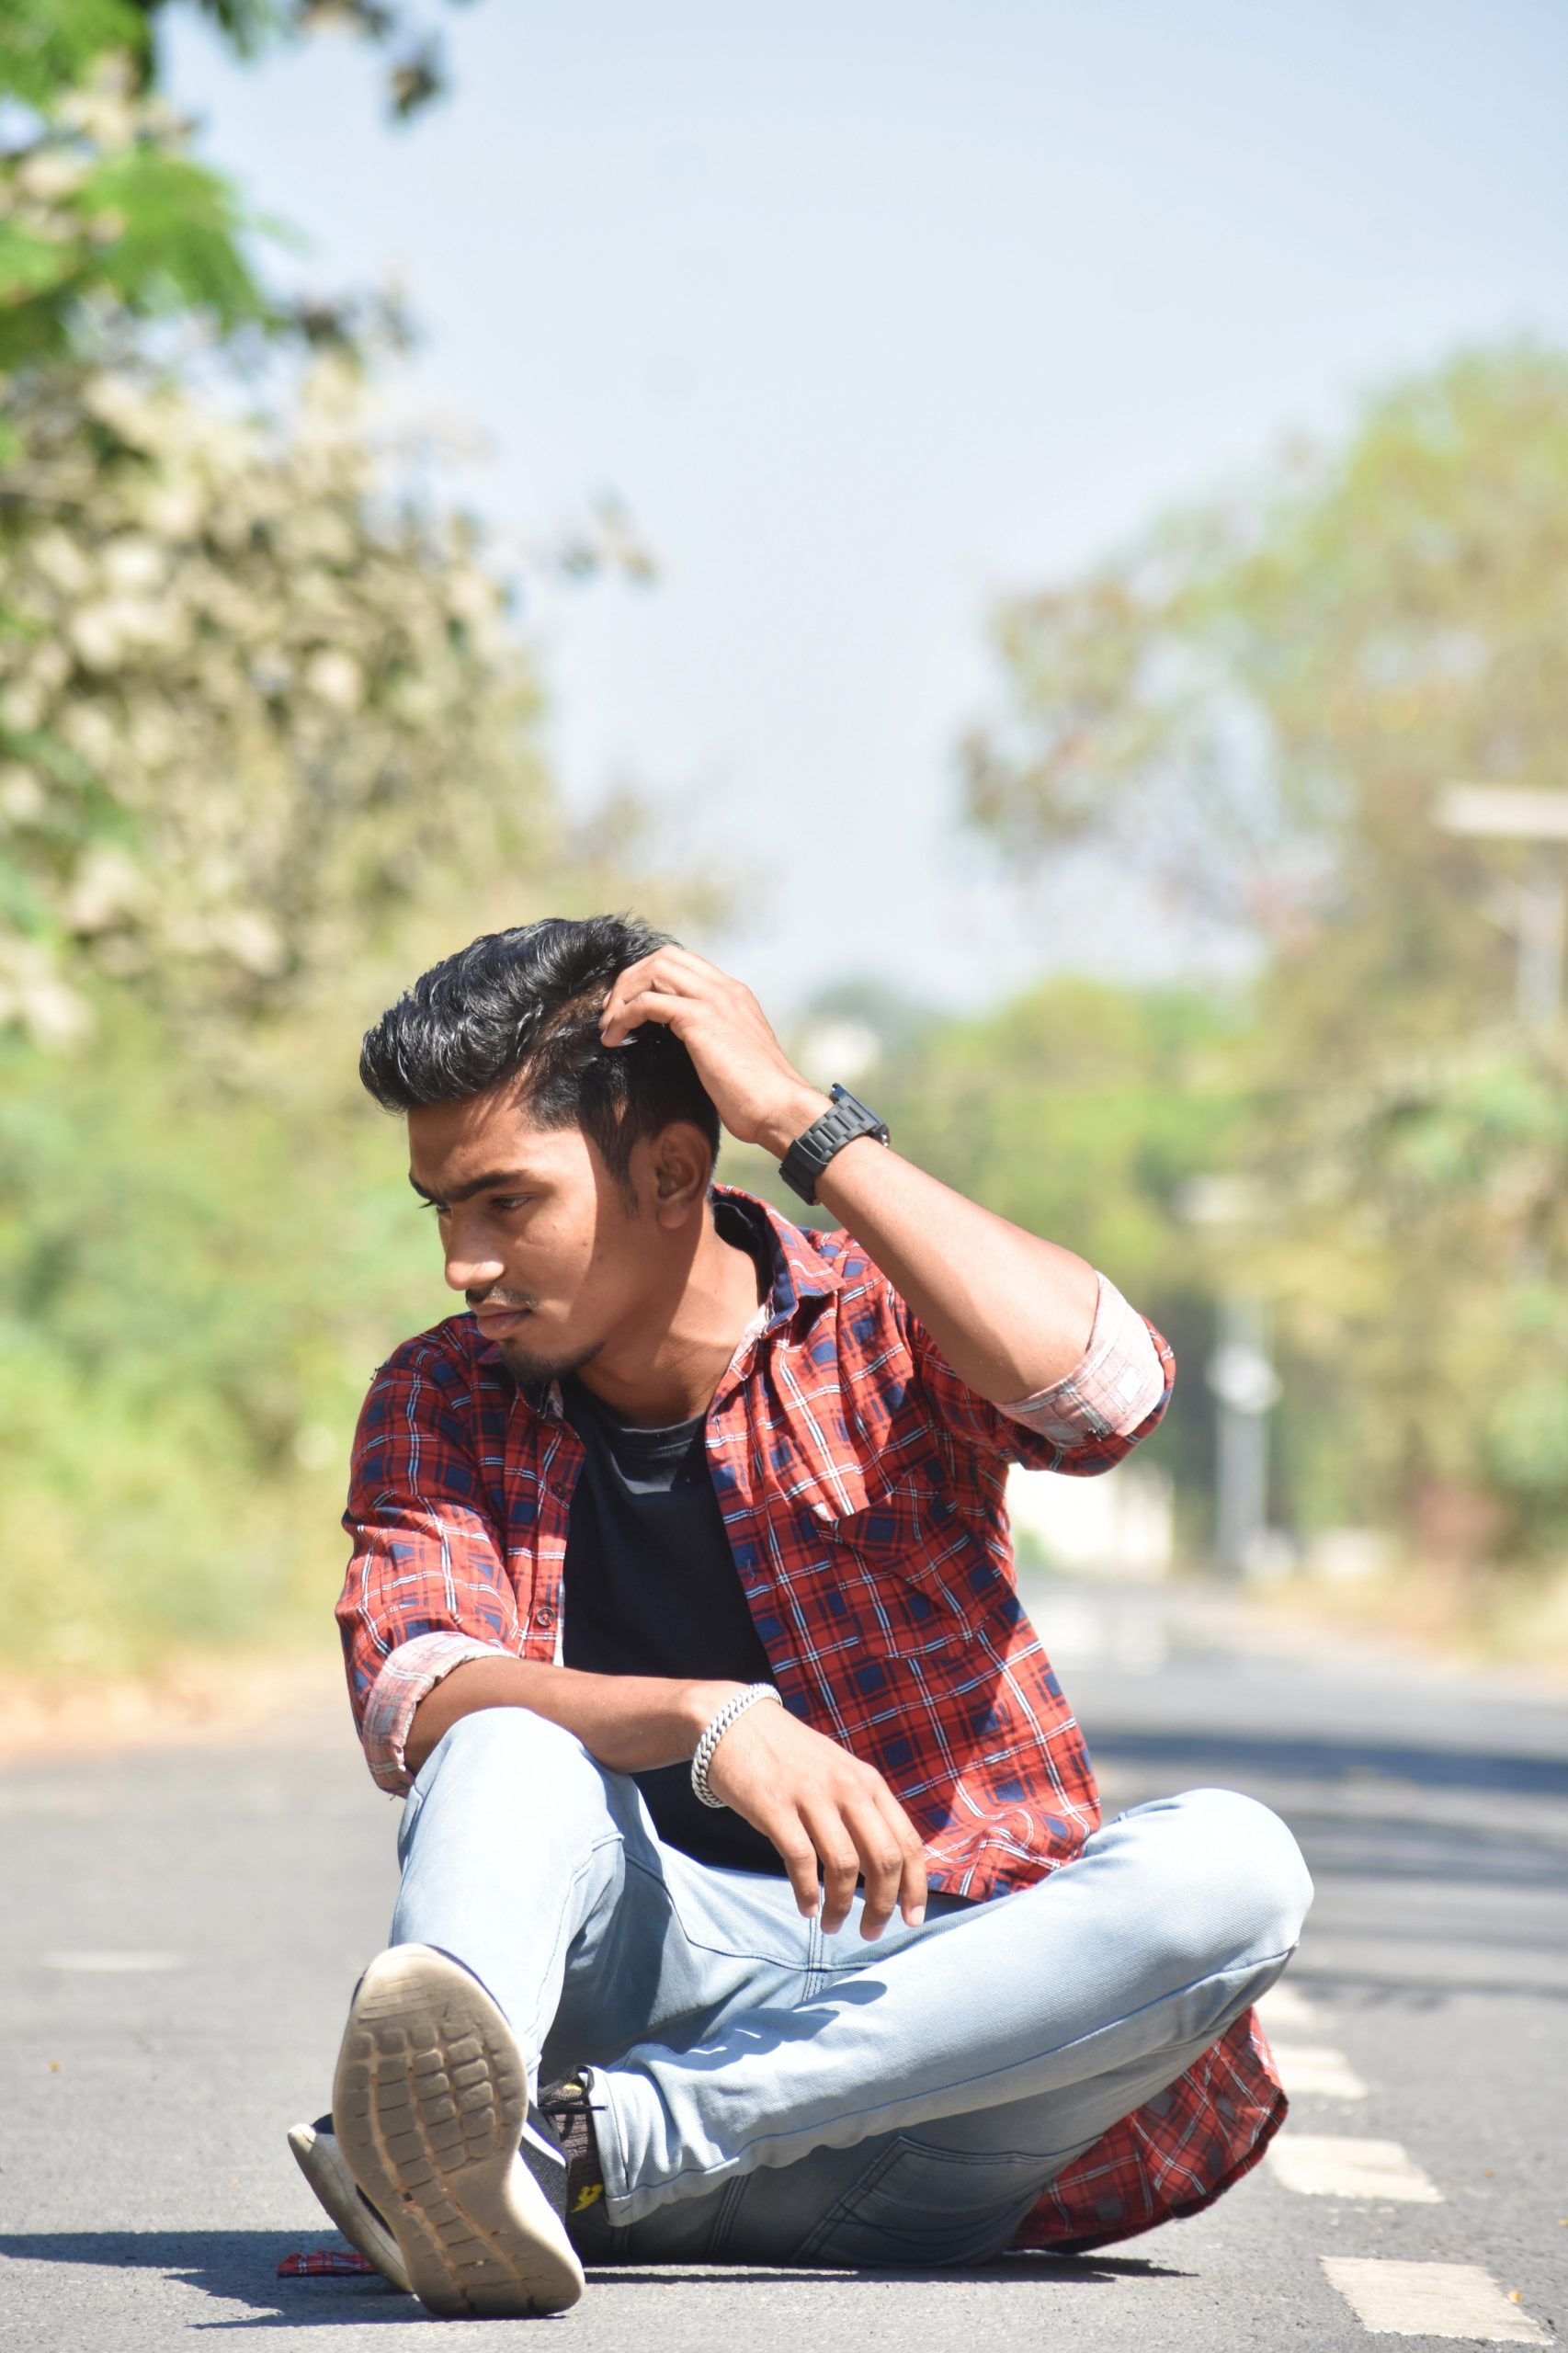 A Model pose on road 368511